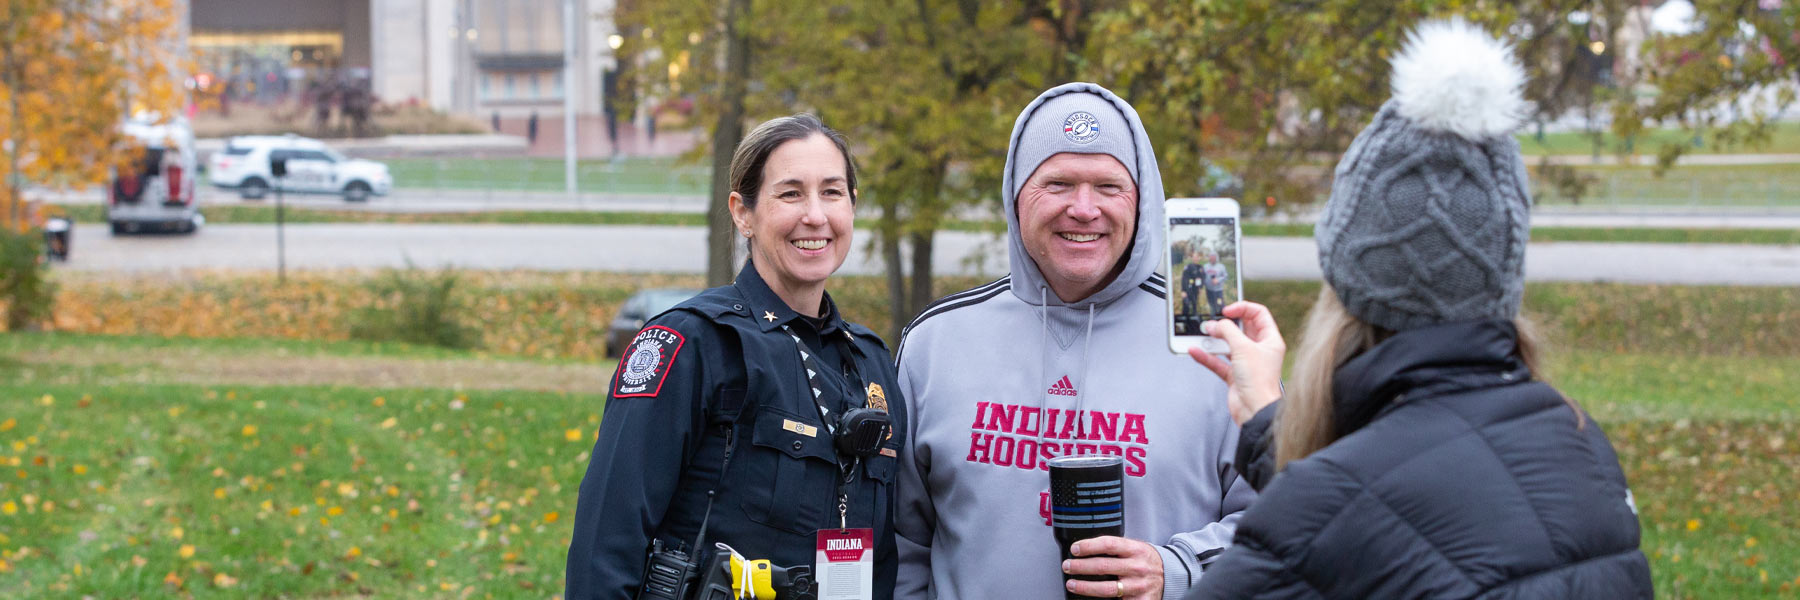 IUPD Police Chief Jill Lees poses with a group of IU football fans while on serving her patrol duties at a game.